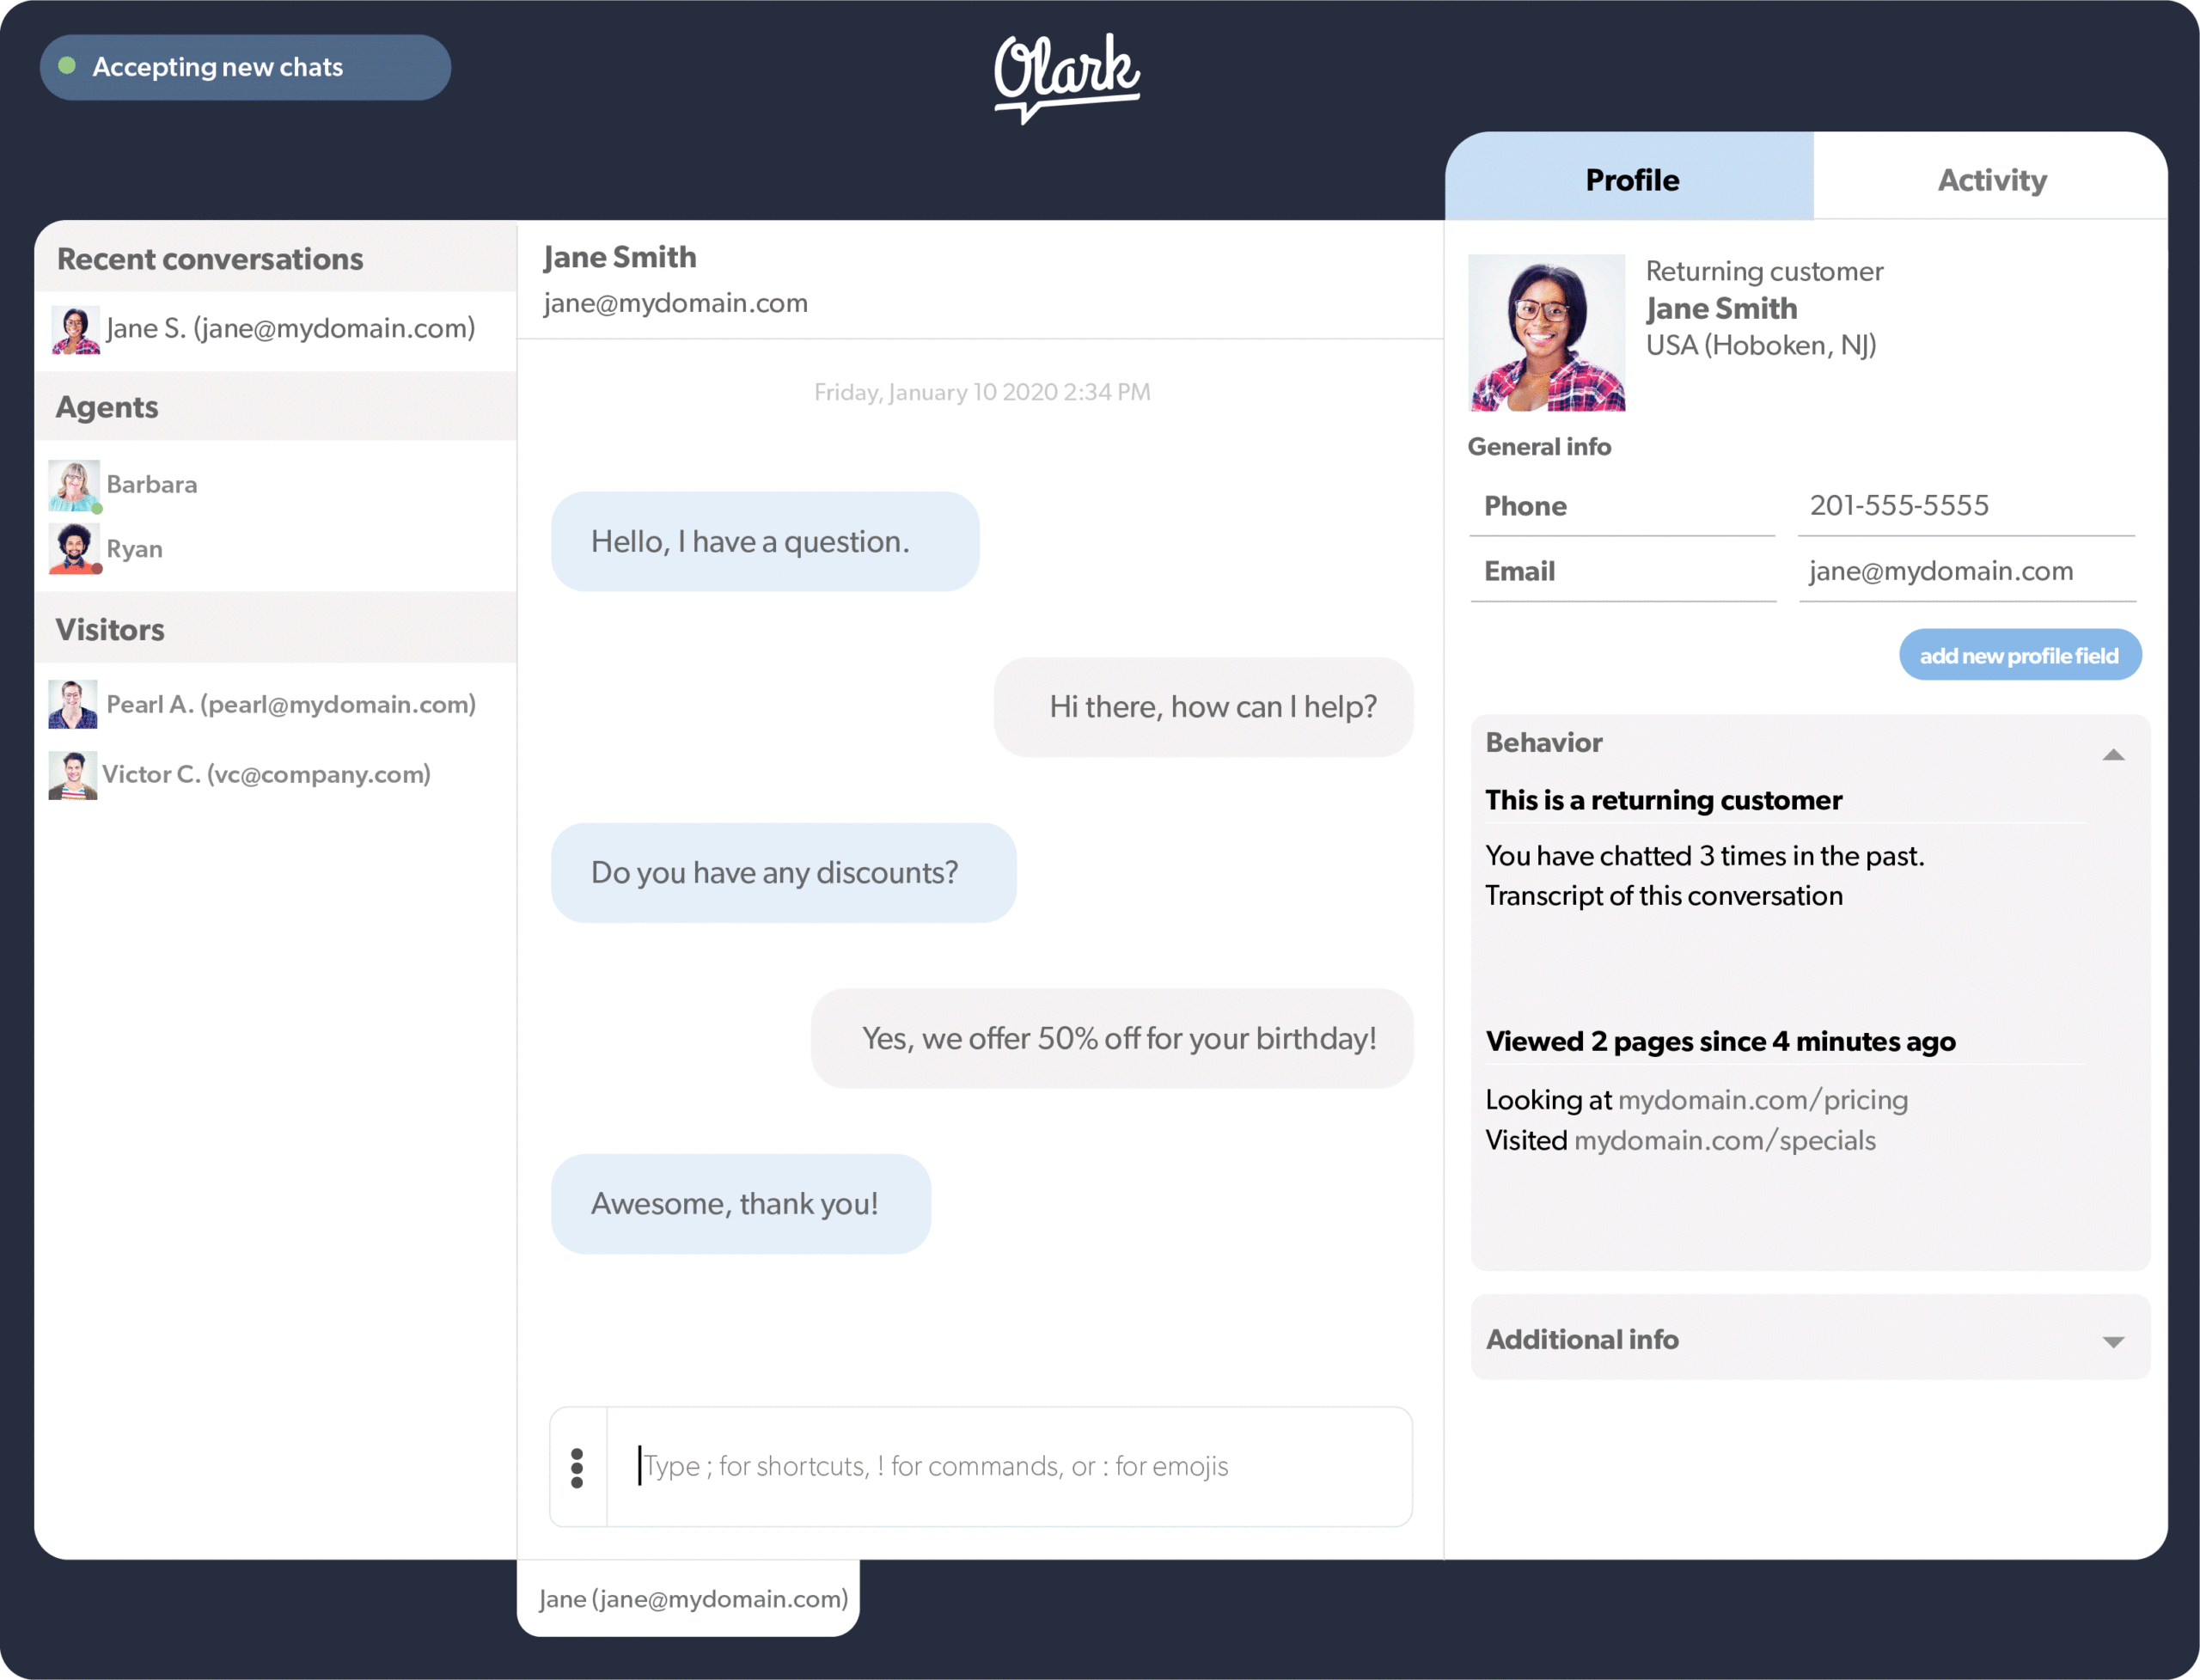 Olark features a clean interface with customer data